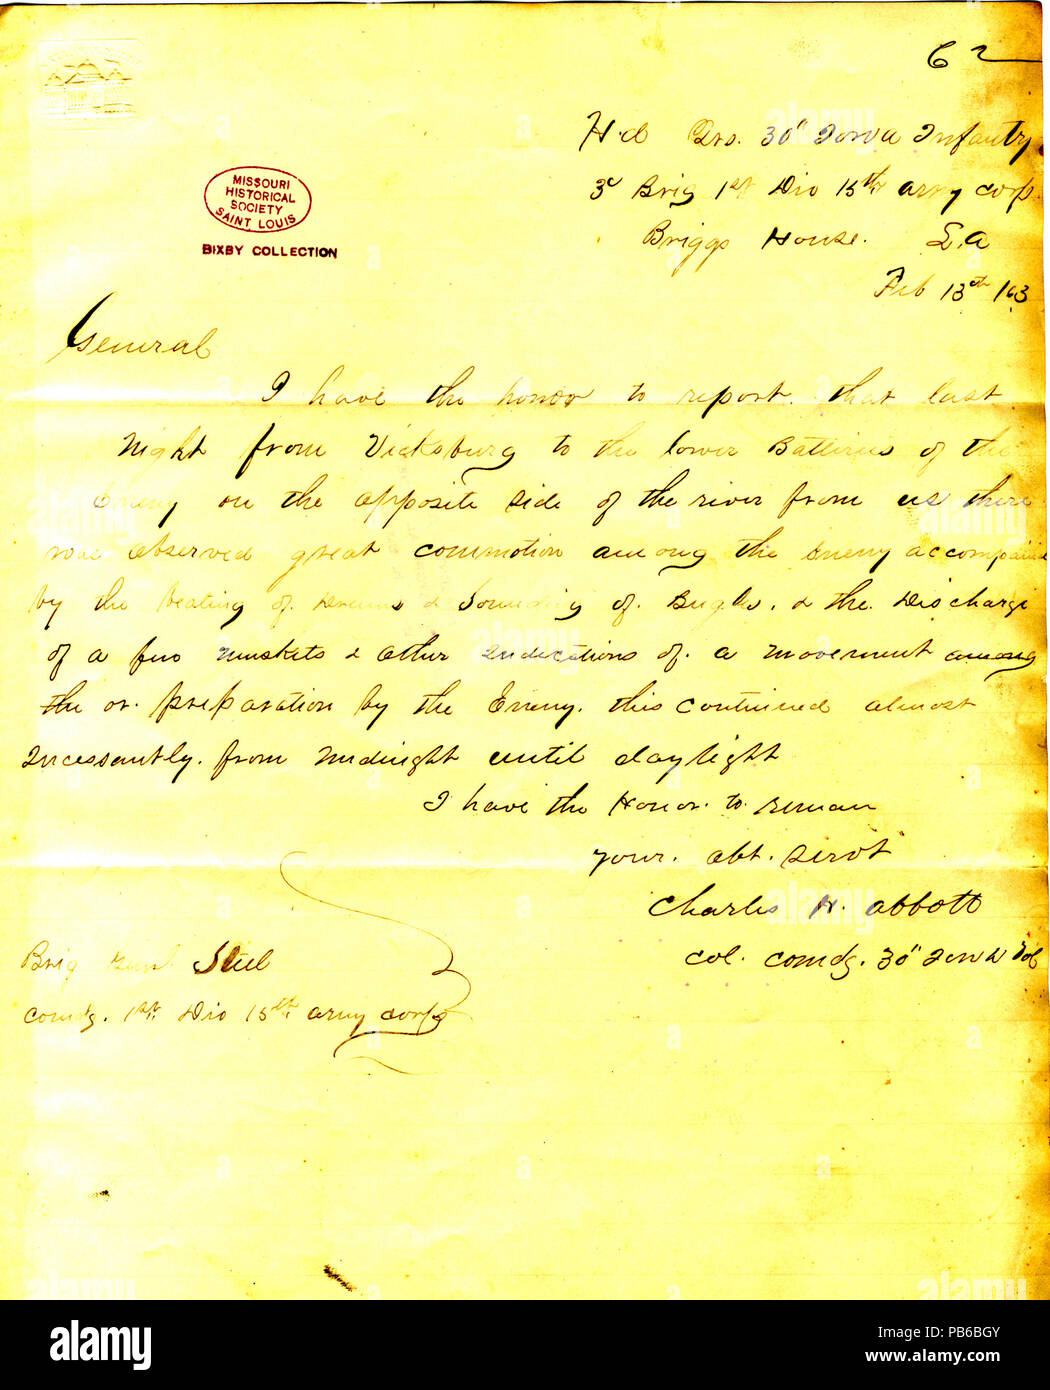 900 Letter from Charles H. Abbott, headquarters, 30th Iowa Infantry, 3rd Brigade, 1st Division, 15th Army Corps, Briggs House, Louisiana, to Brigadier General Steele, February 13, 1863 Stock Photo